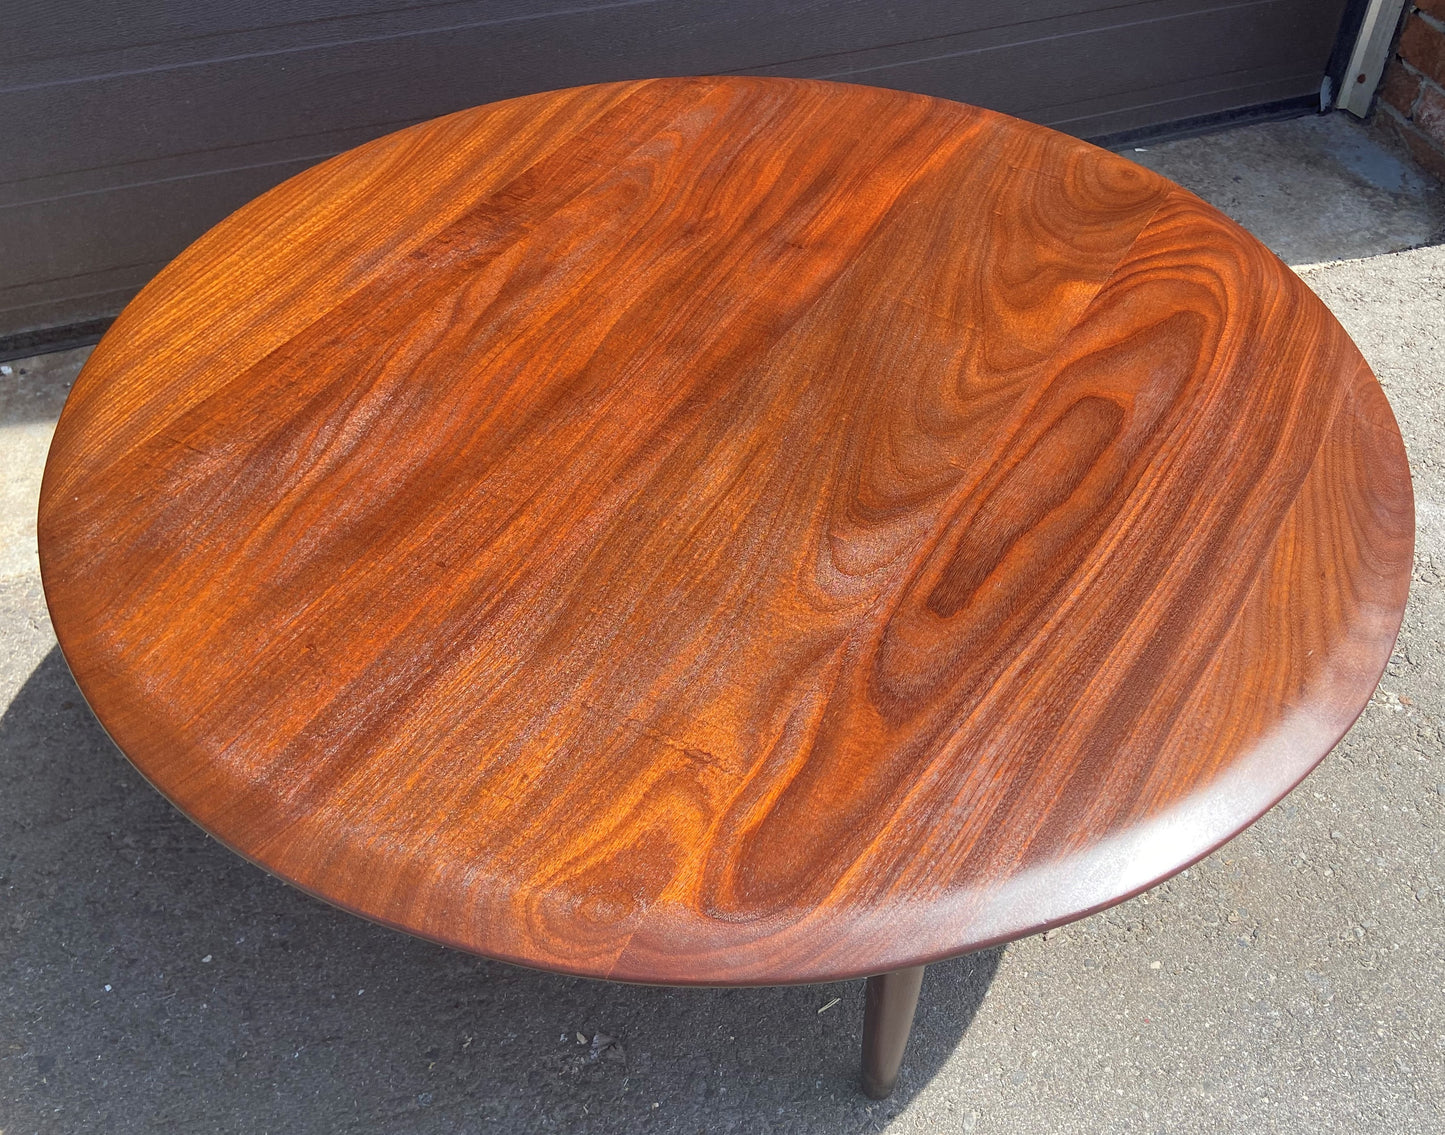 REFINISHED Mid Century Modern SOLID Teak Coffee Table Round by Imperial